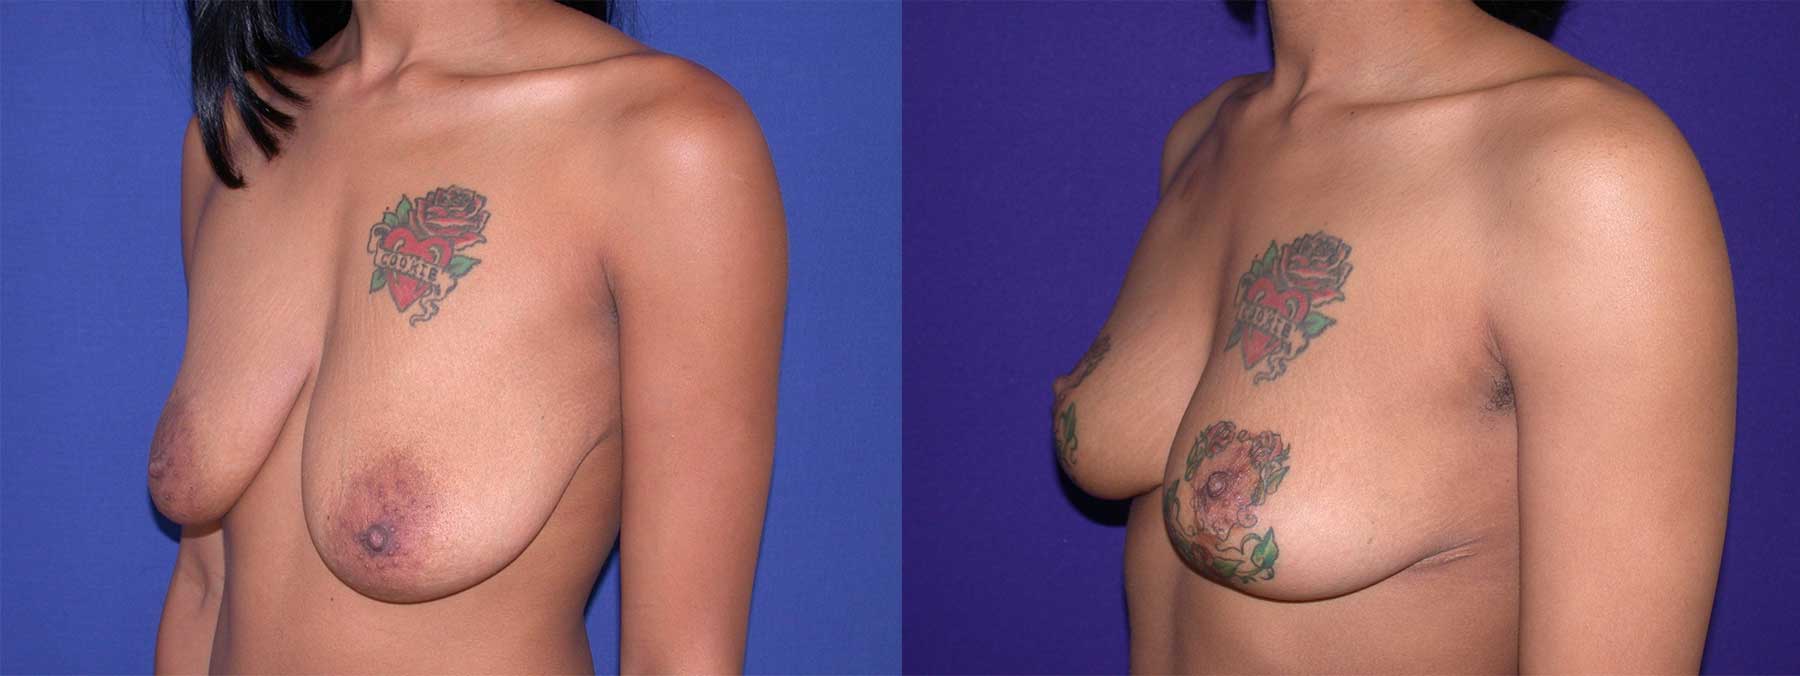 Before and After Image of Breast Lift Mastoplexy